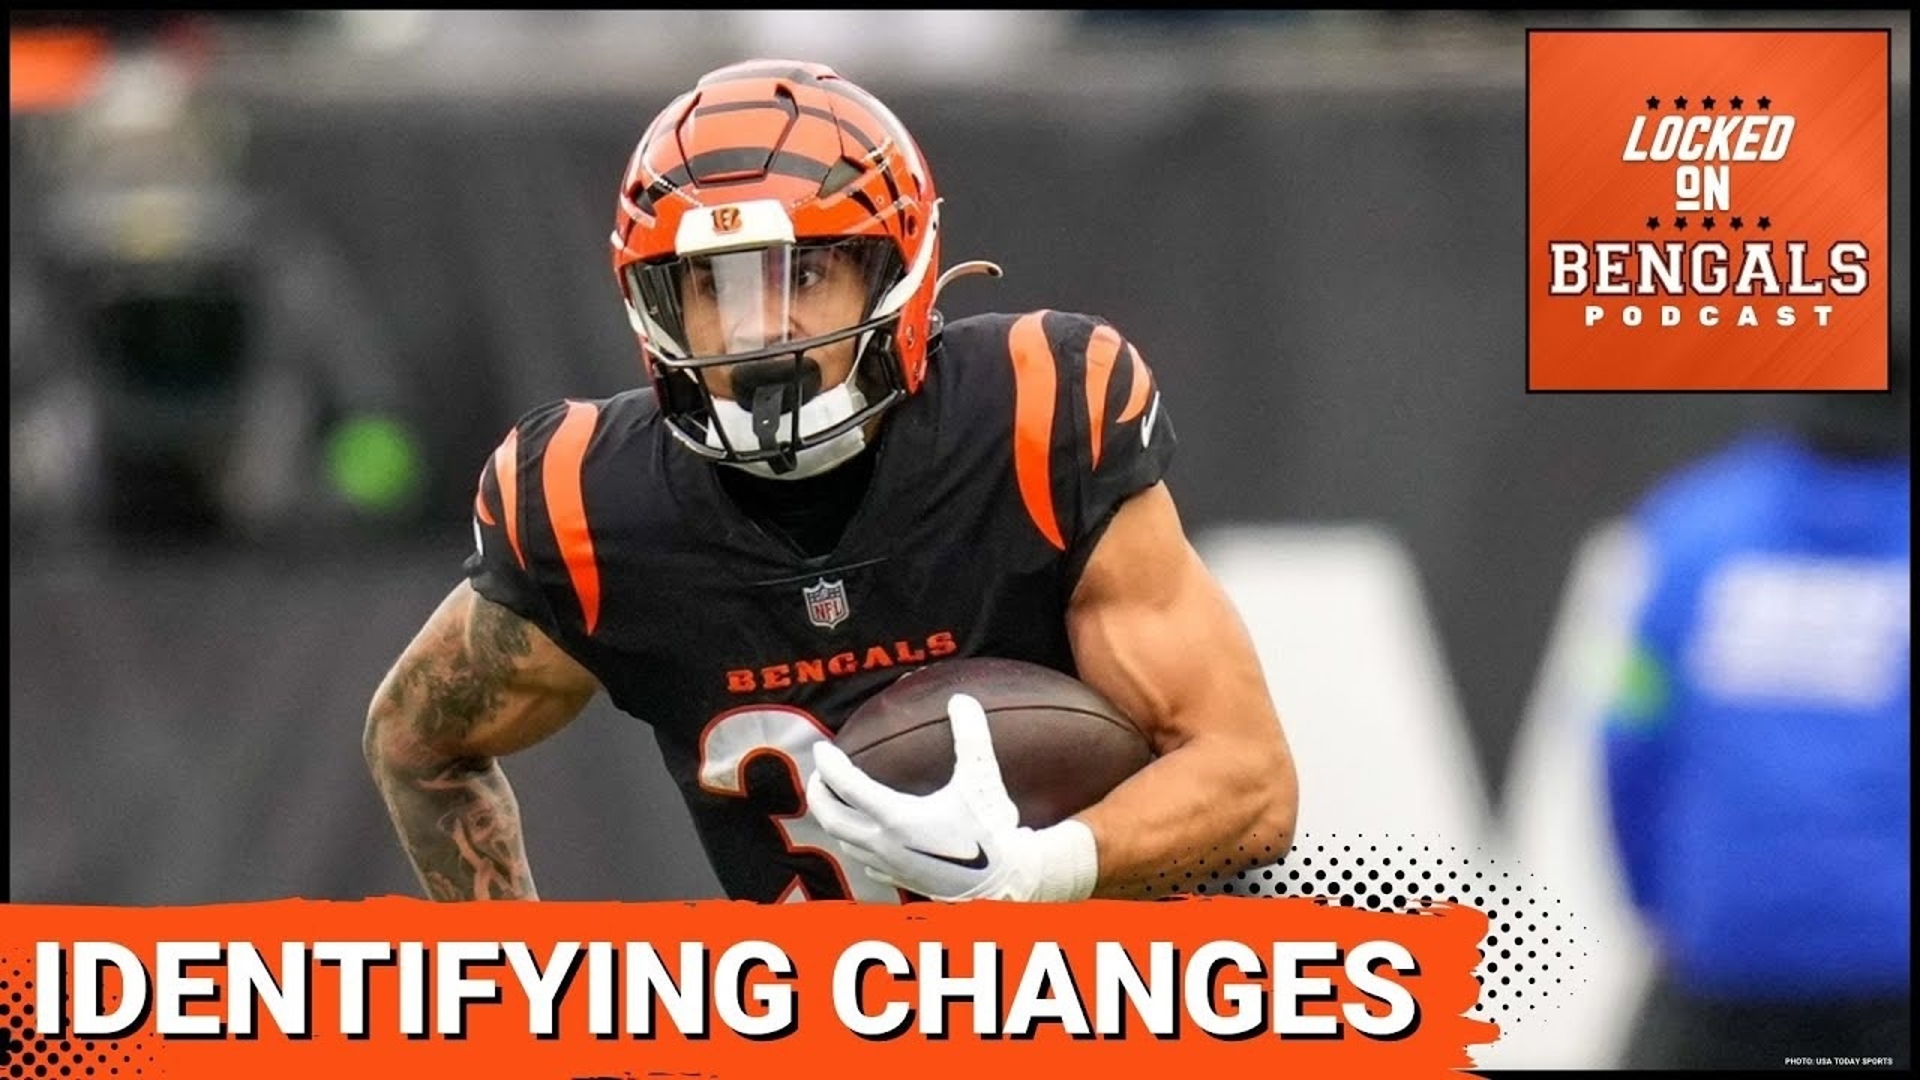 What changes will the Cincinnati Bengals make on offense and defense this season?